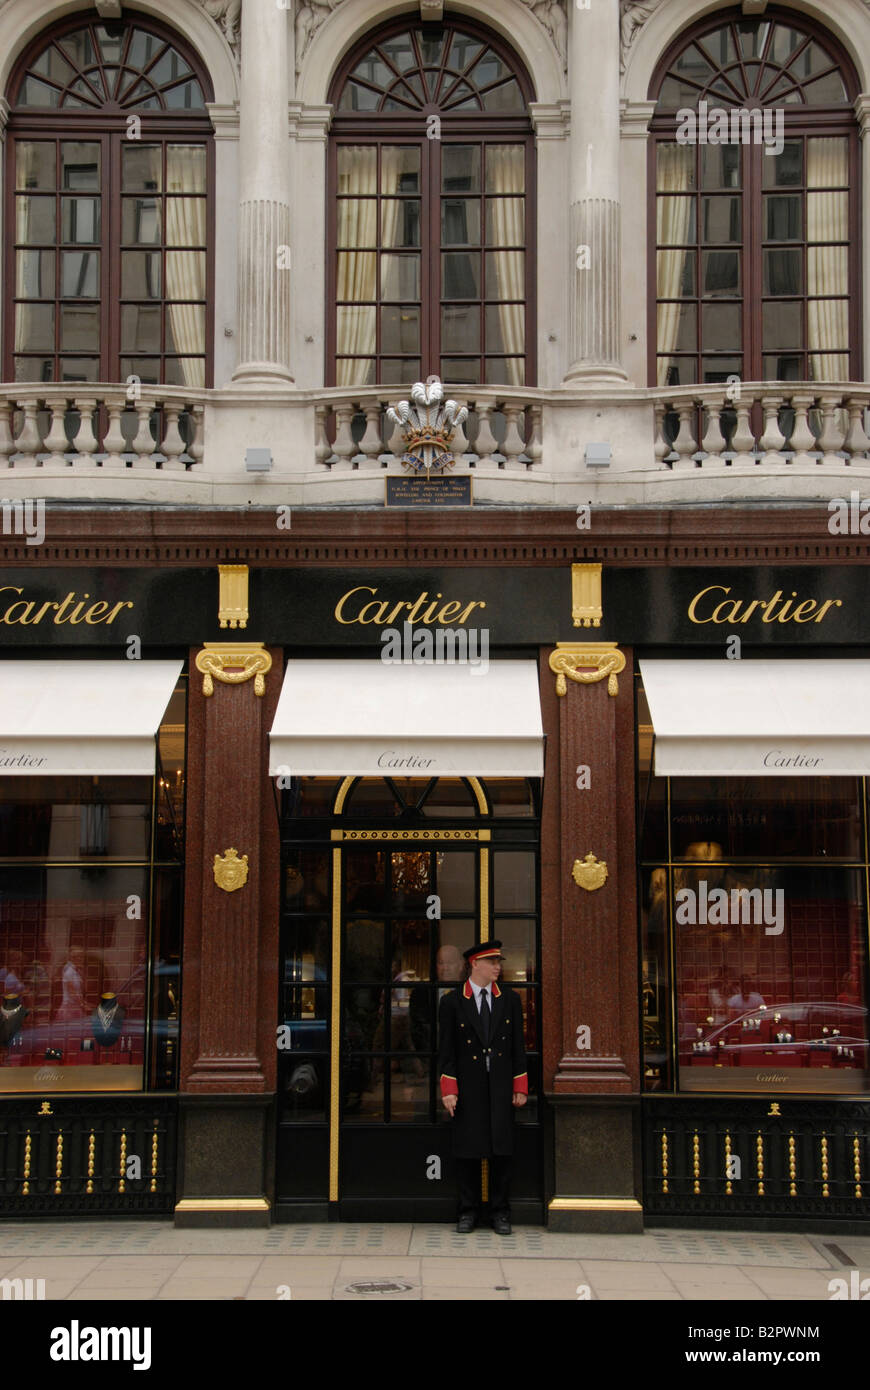 Cartier Store Front On Old Bond Street Stock Photo - Download